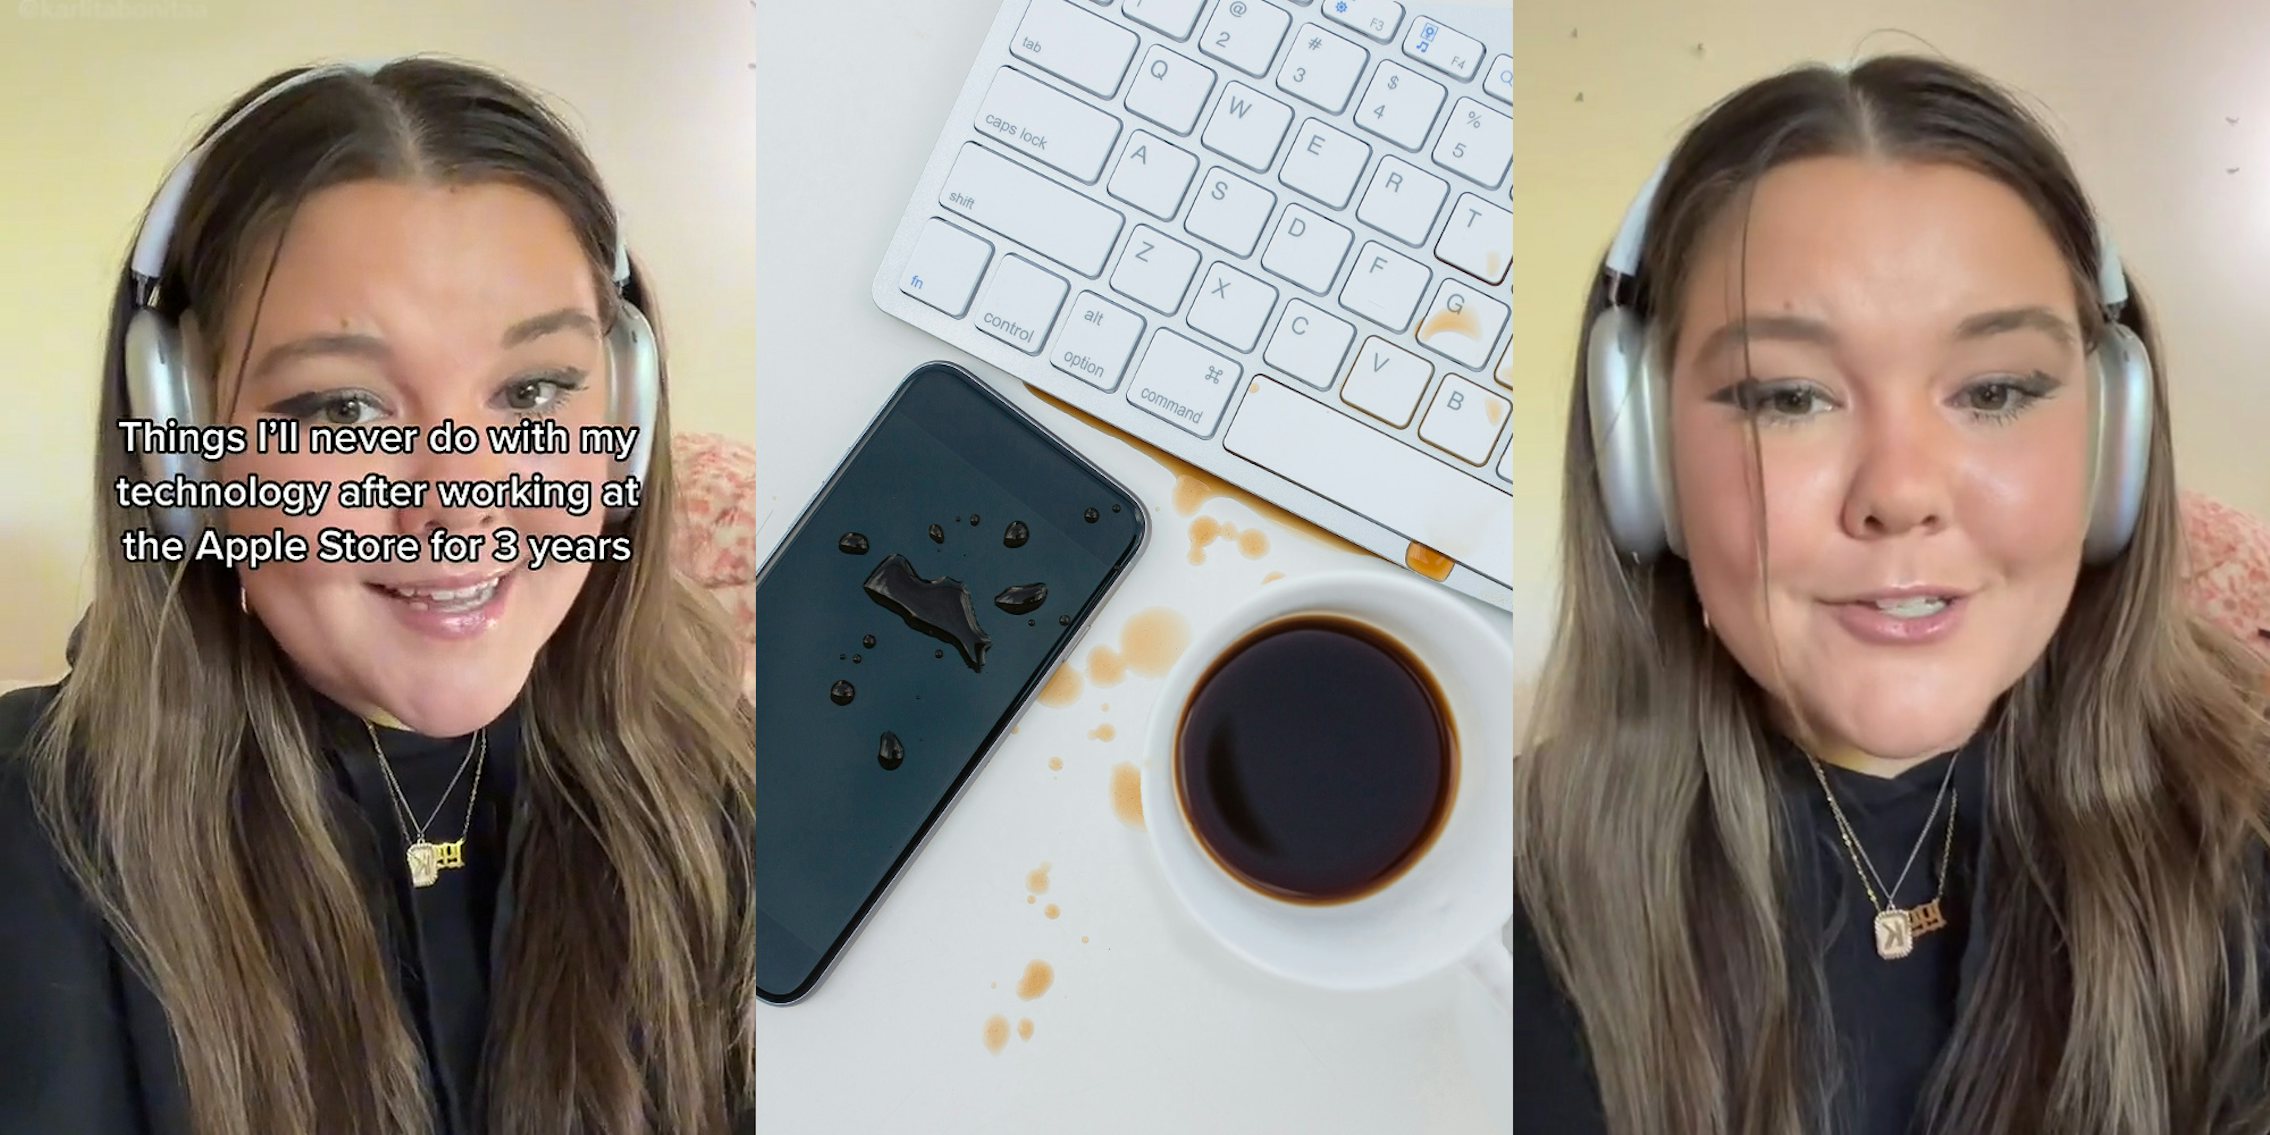 Woman with headphones on speaking caption 'Things I'll never do with my technology after working at the Apple Store for 3 years' (l) spilled cup of coffee on iPhone and keyboard on white surface (c) woman with headphones speaking (r)